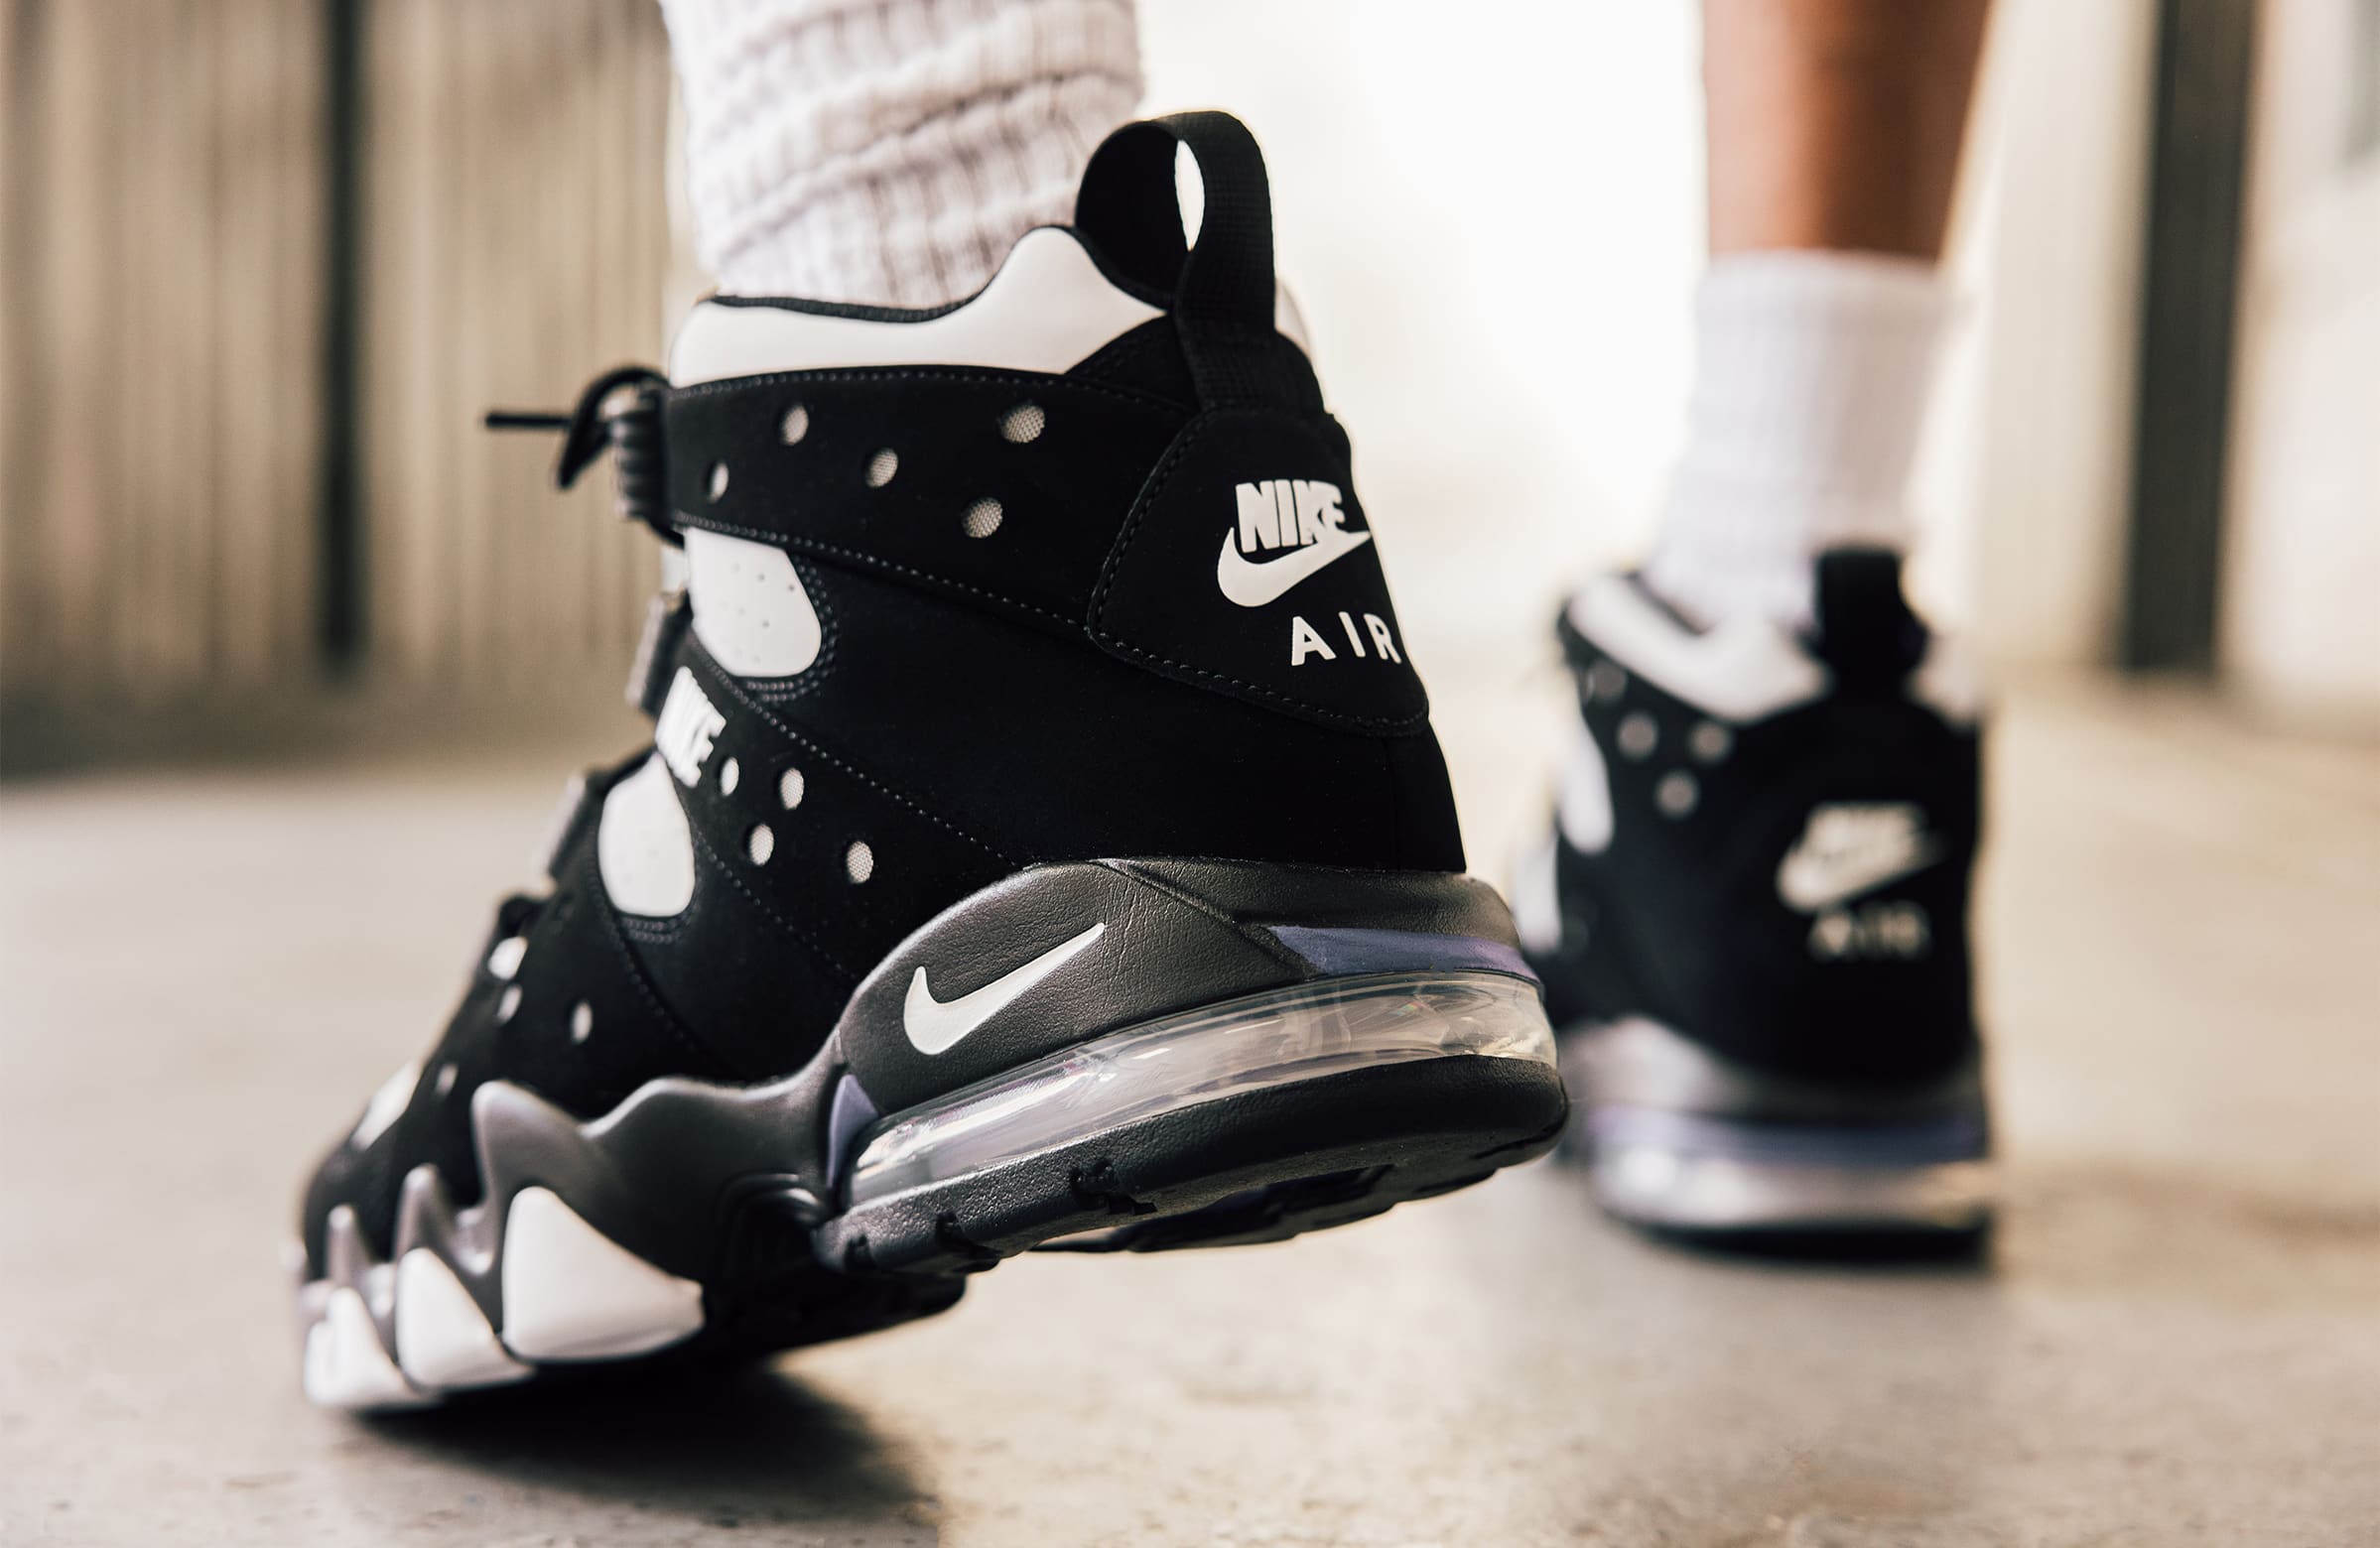 Coming Soon: Nike Air Max2 CB ’94 “Black and Purple” – DTLR